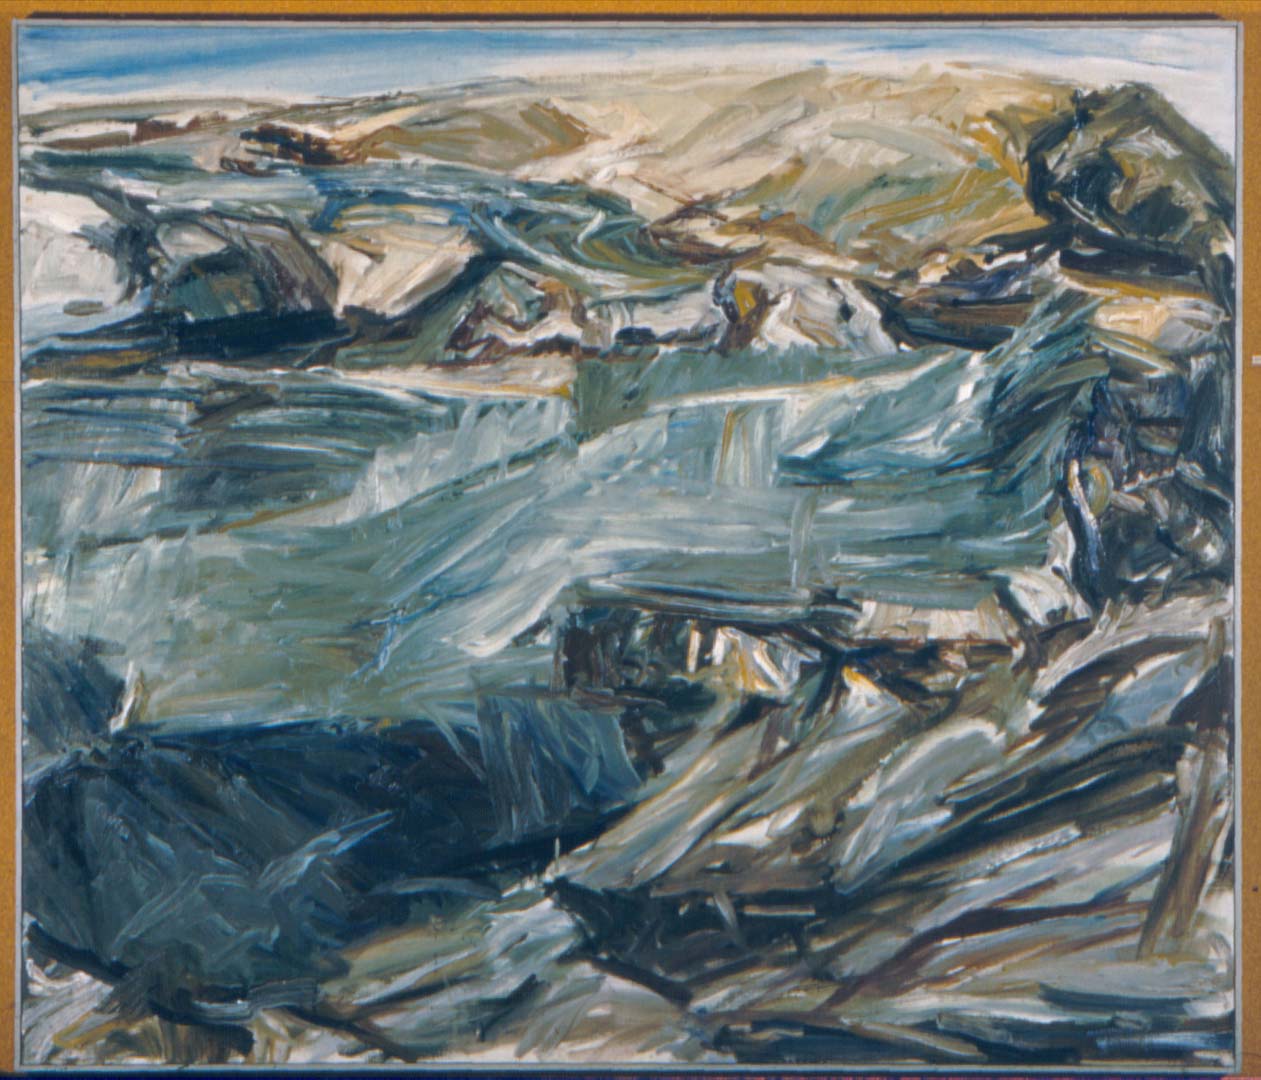 1955 Landscape at Dawn Oil on Canvas 44 x 52